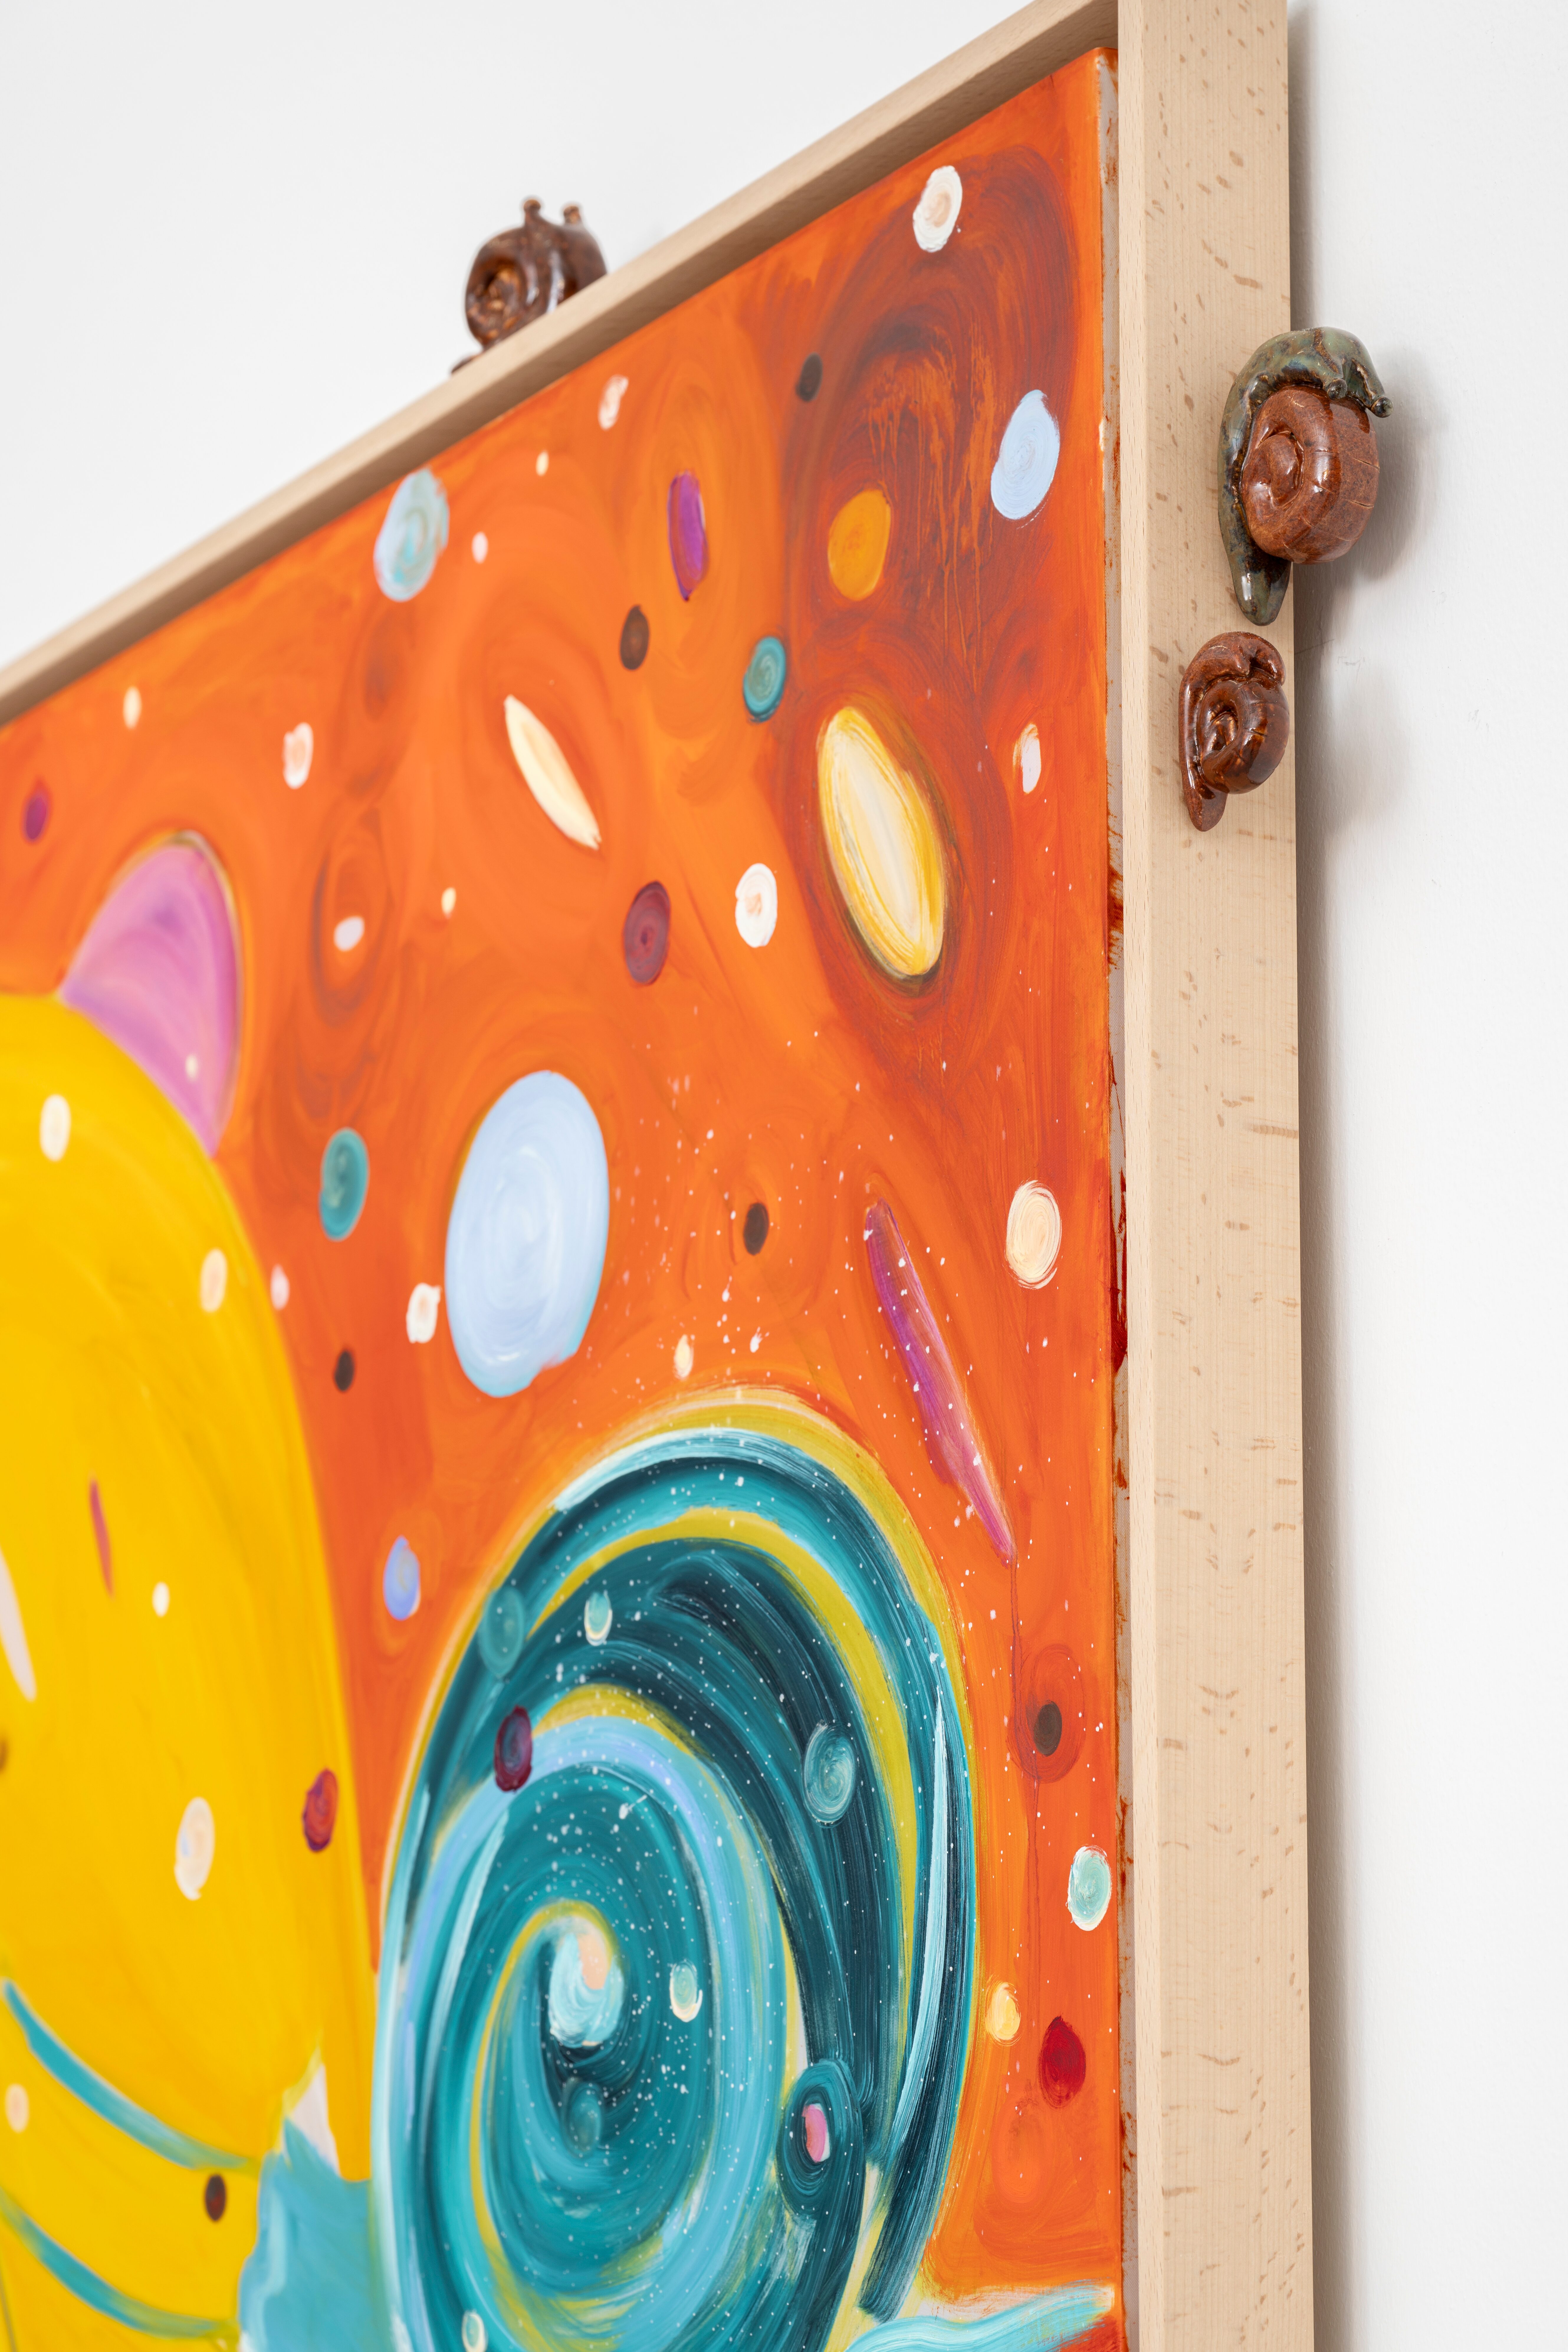 Little snails climbing on the side of a colourful painting.